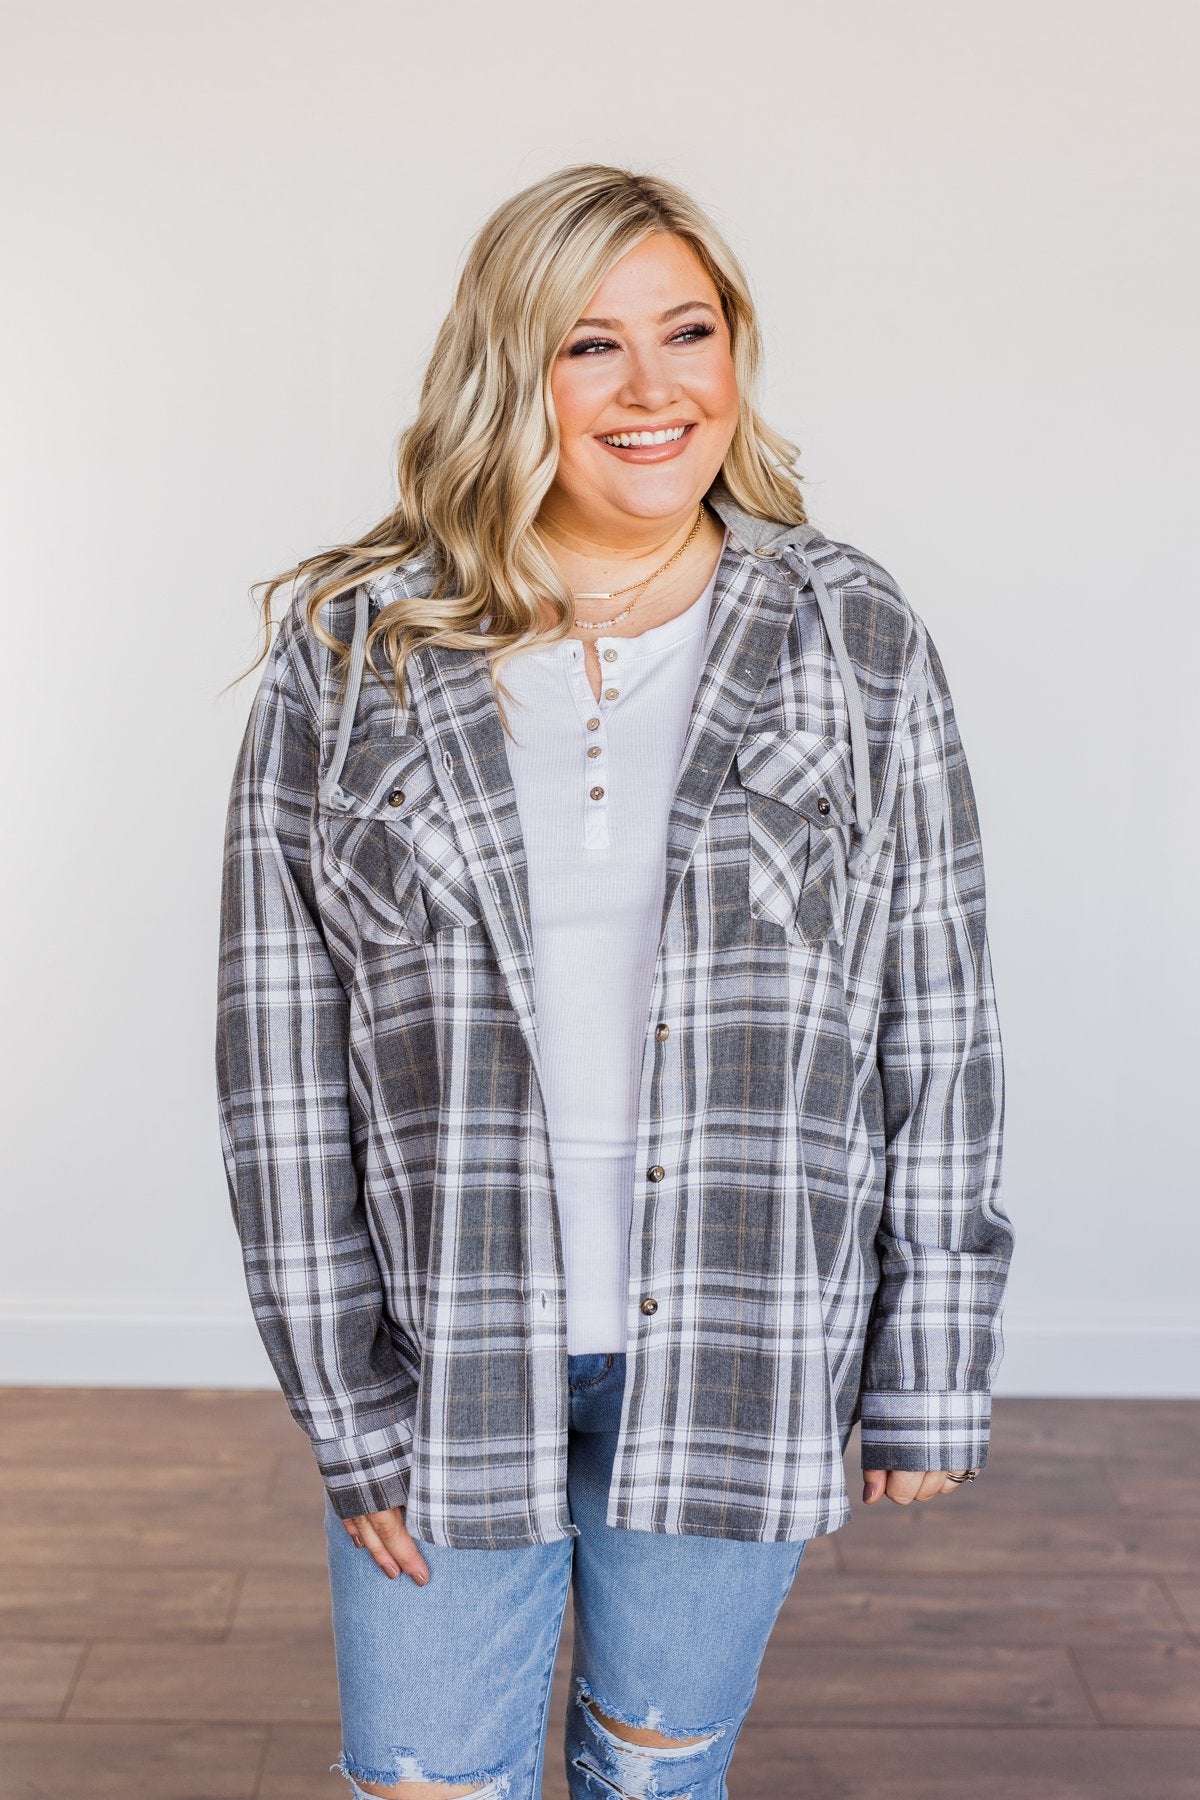 Knowing You're Mine Hooded Plaid Top- Grey